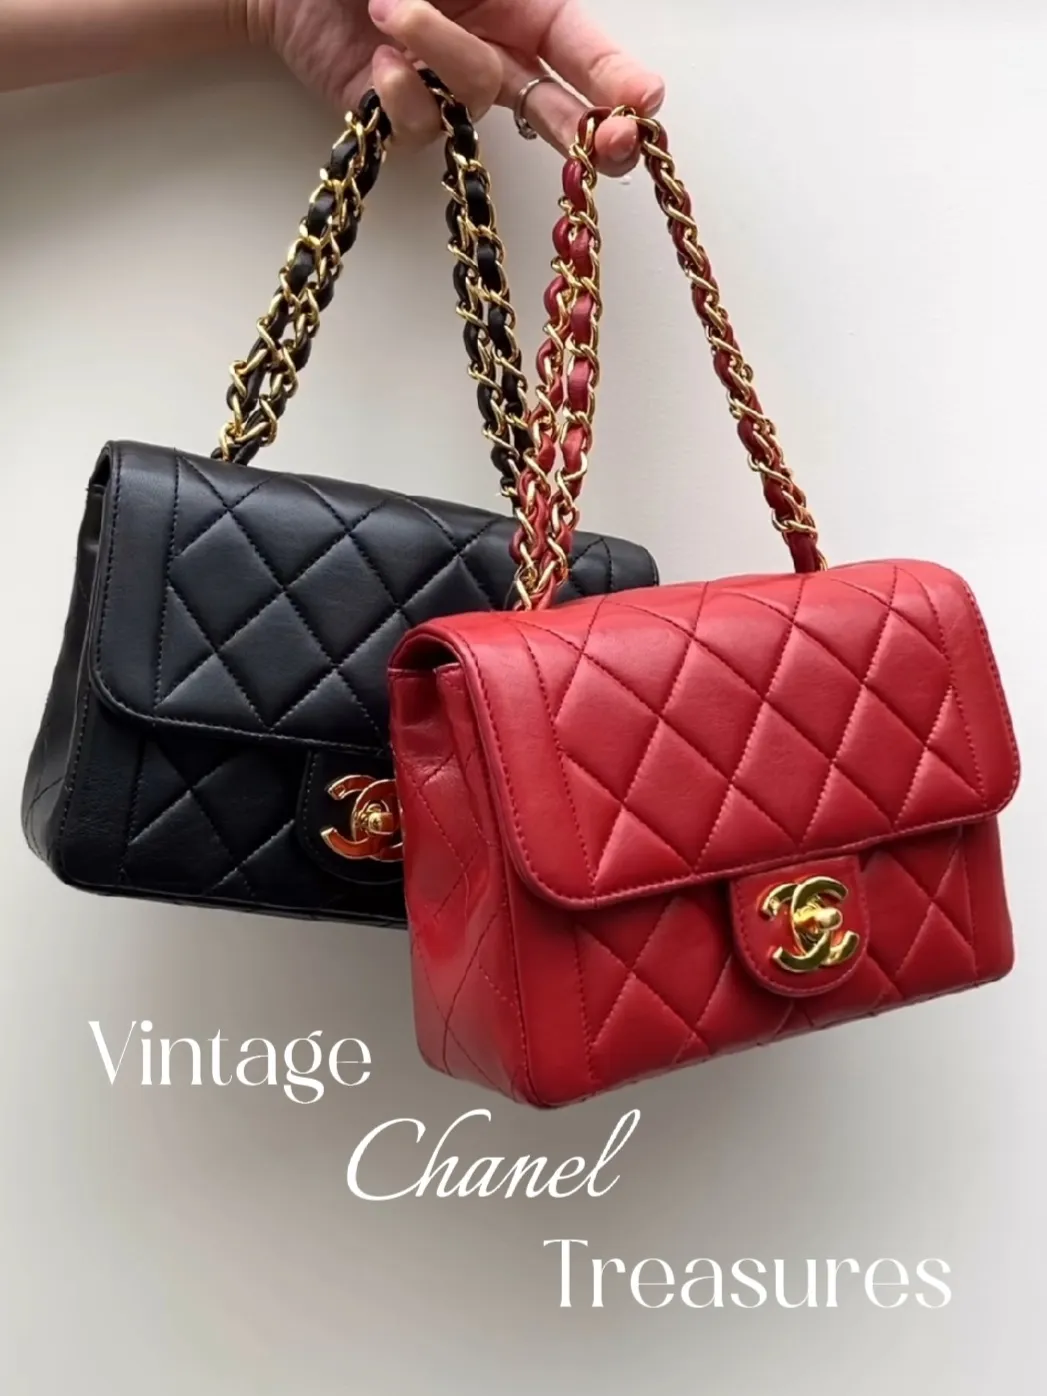 Rare Vintage Chanel Bags & Accessories @ 10% off